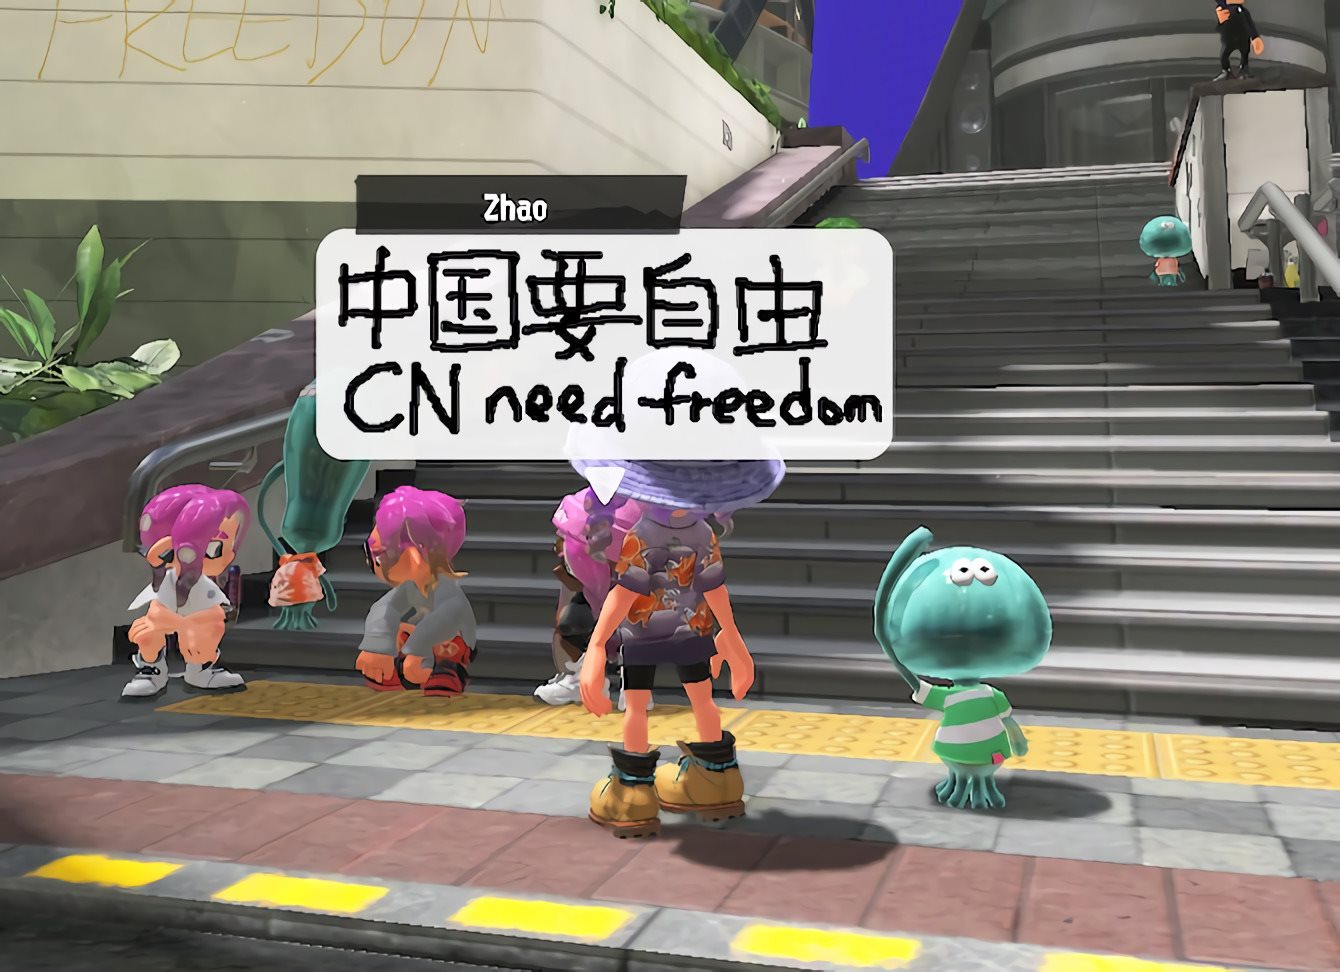 Splatoon 3: China’s white paper protest expands into popular games around the world